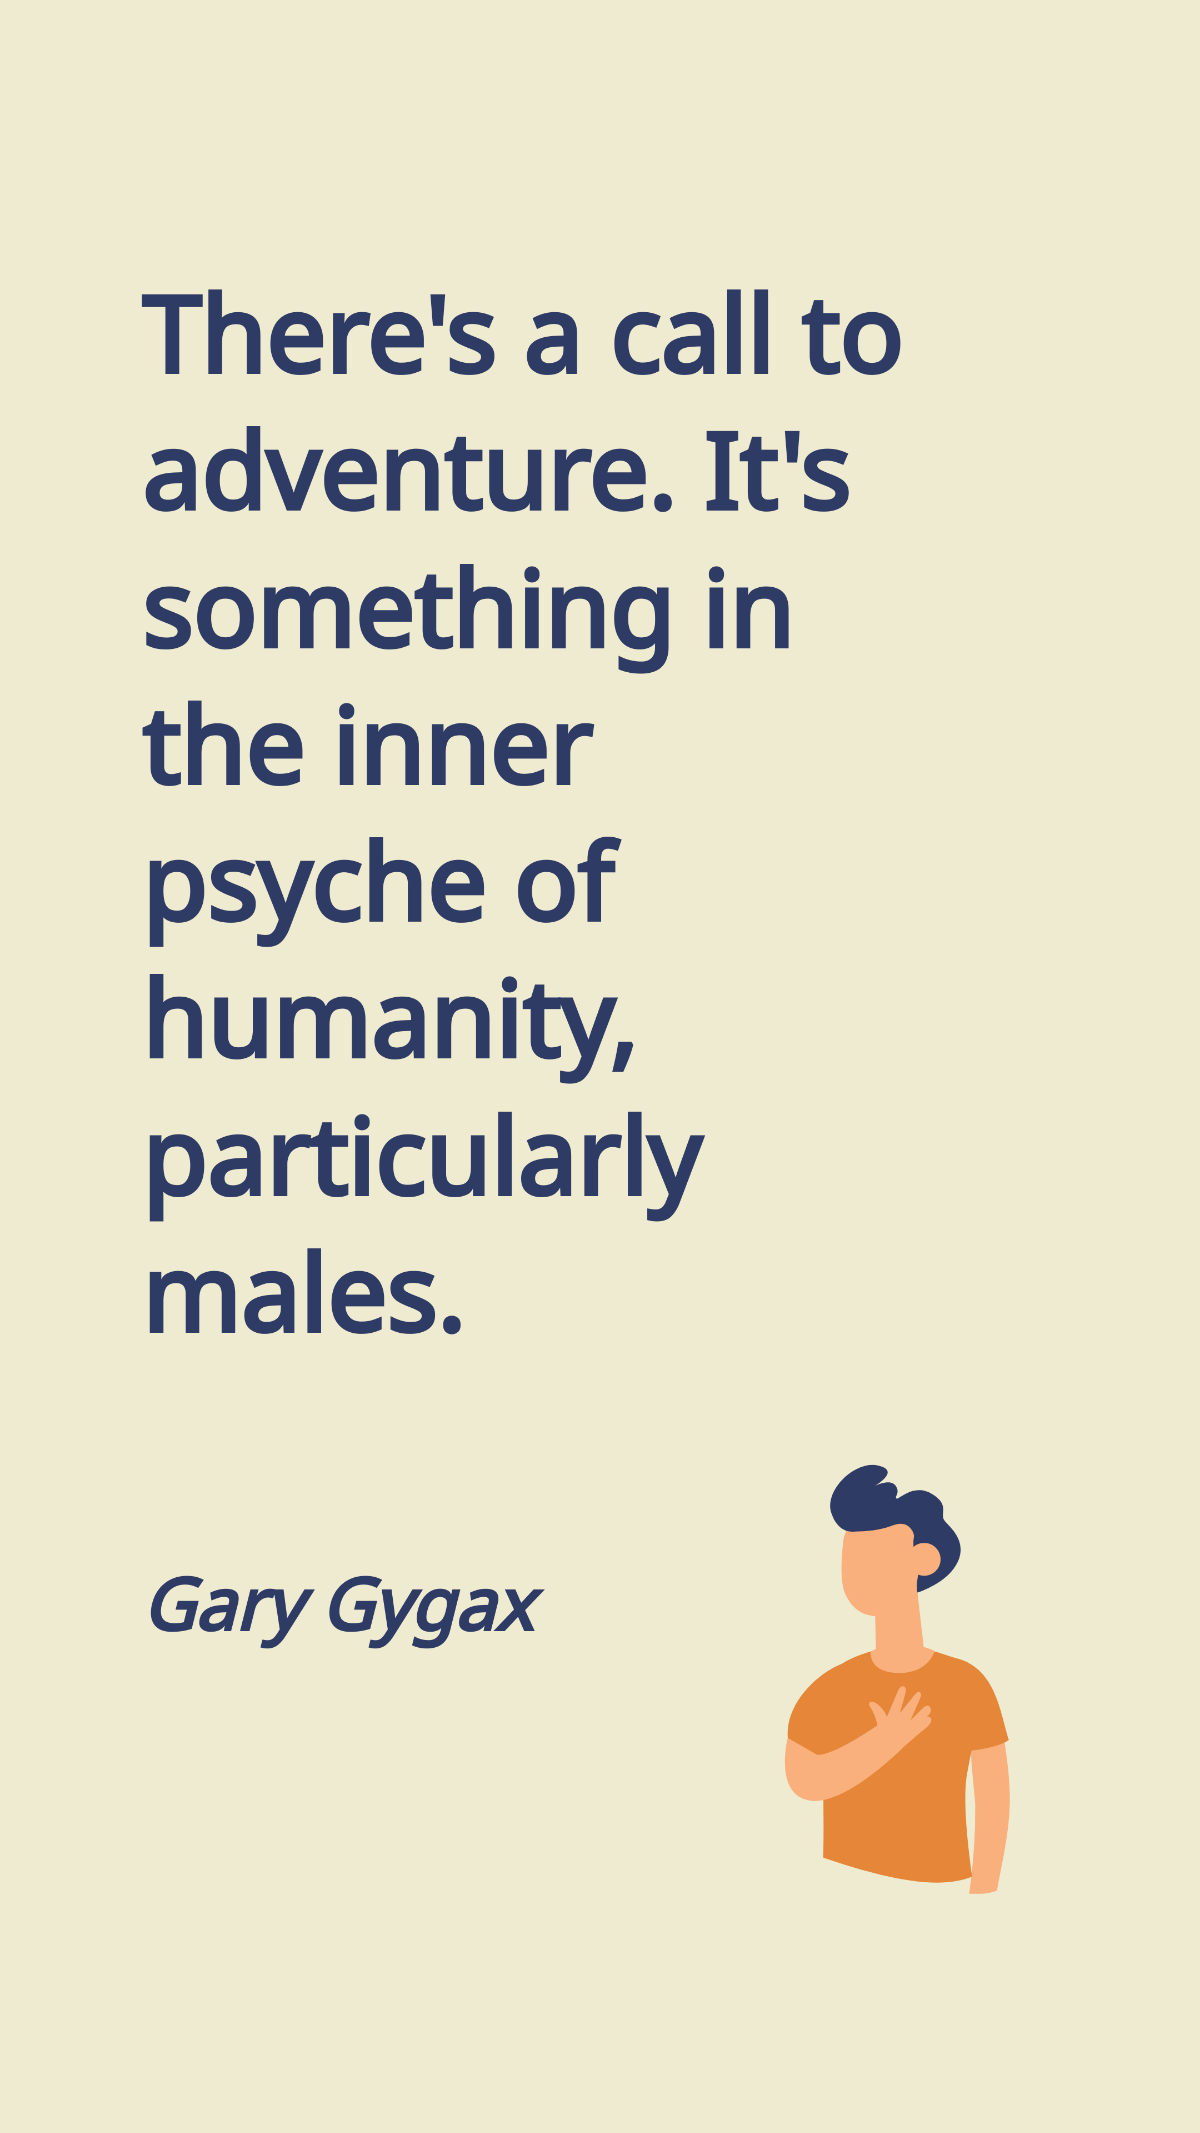 Gary Gygax - There's a call to adventure. It's something in the inner psyche of humanity, particularly males. Template